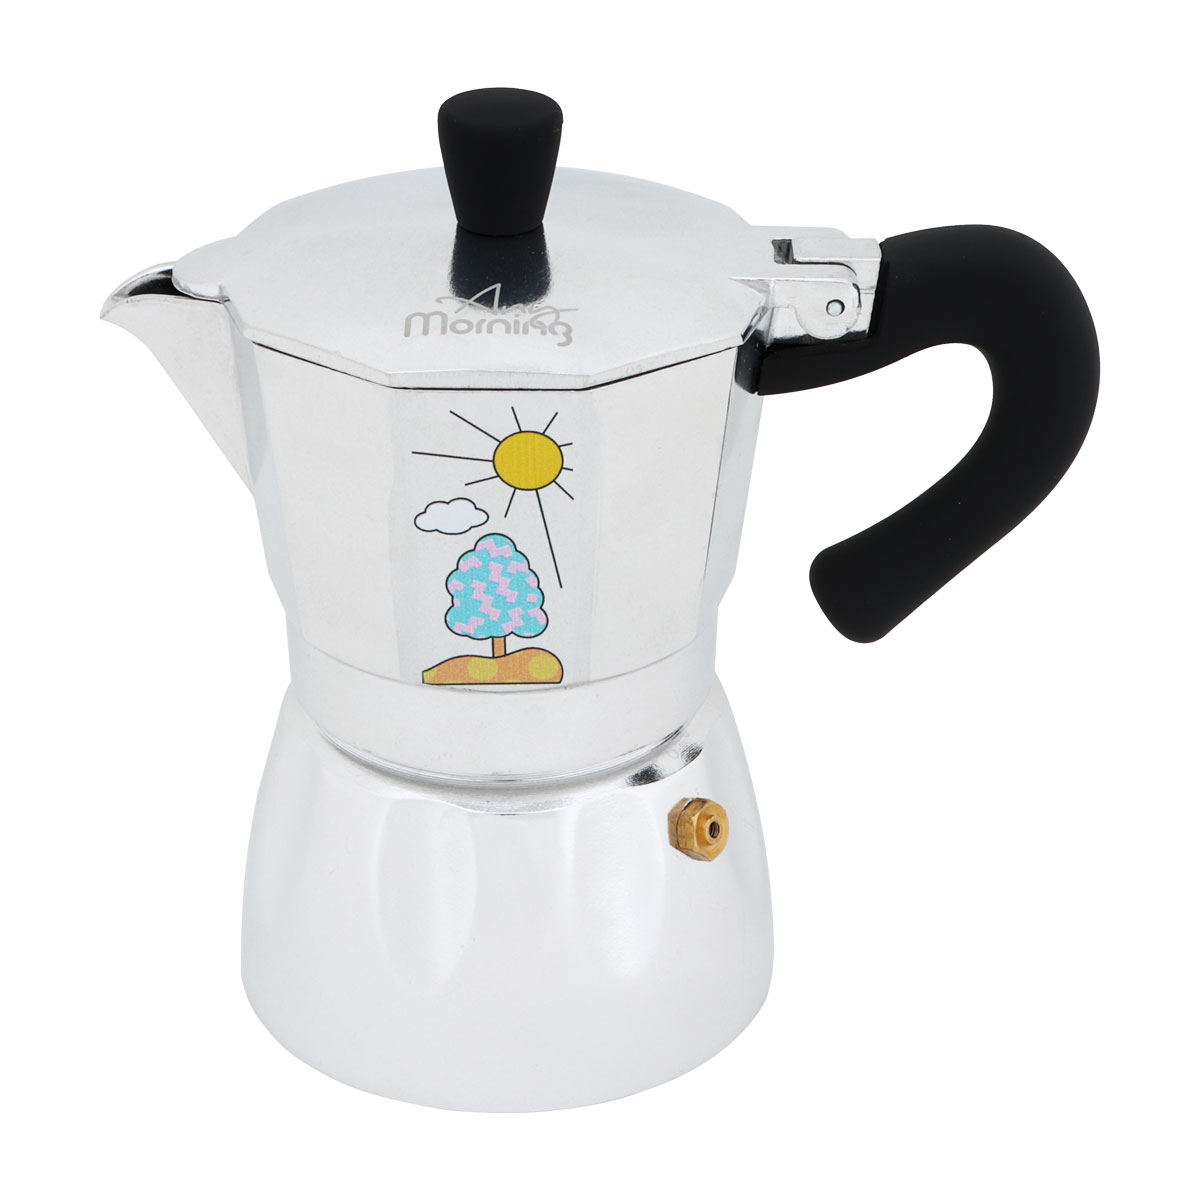 Any morning hes-3 aluminum espresso coffee maker 120 ml